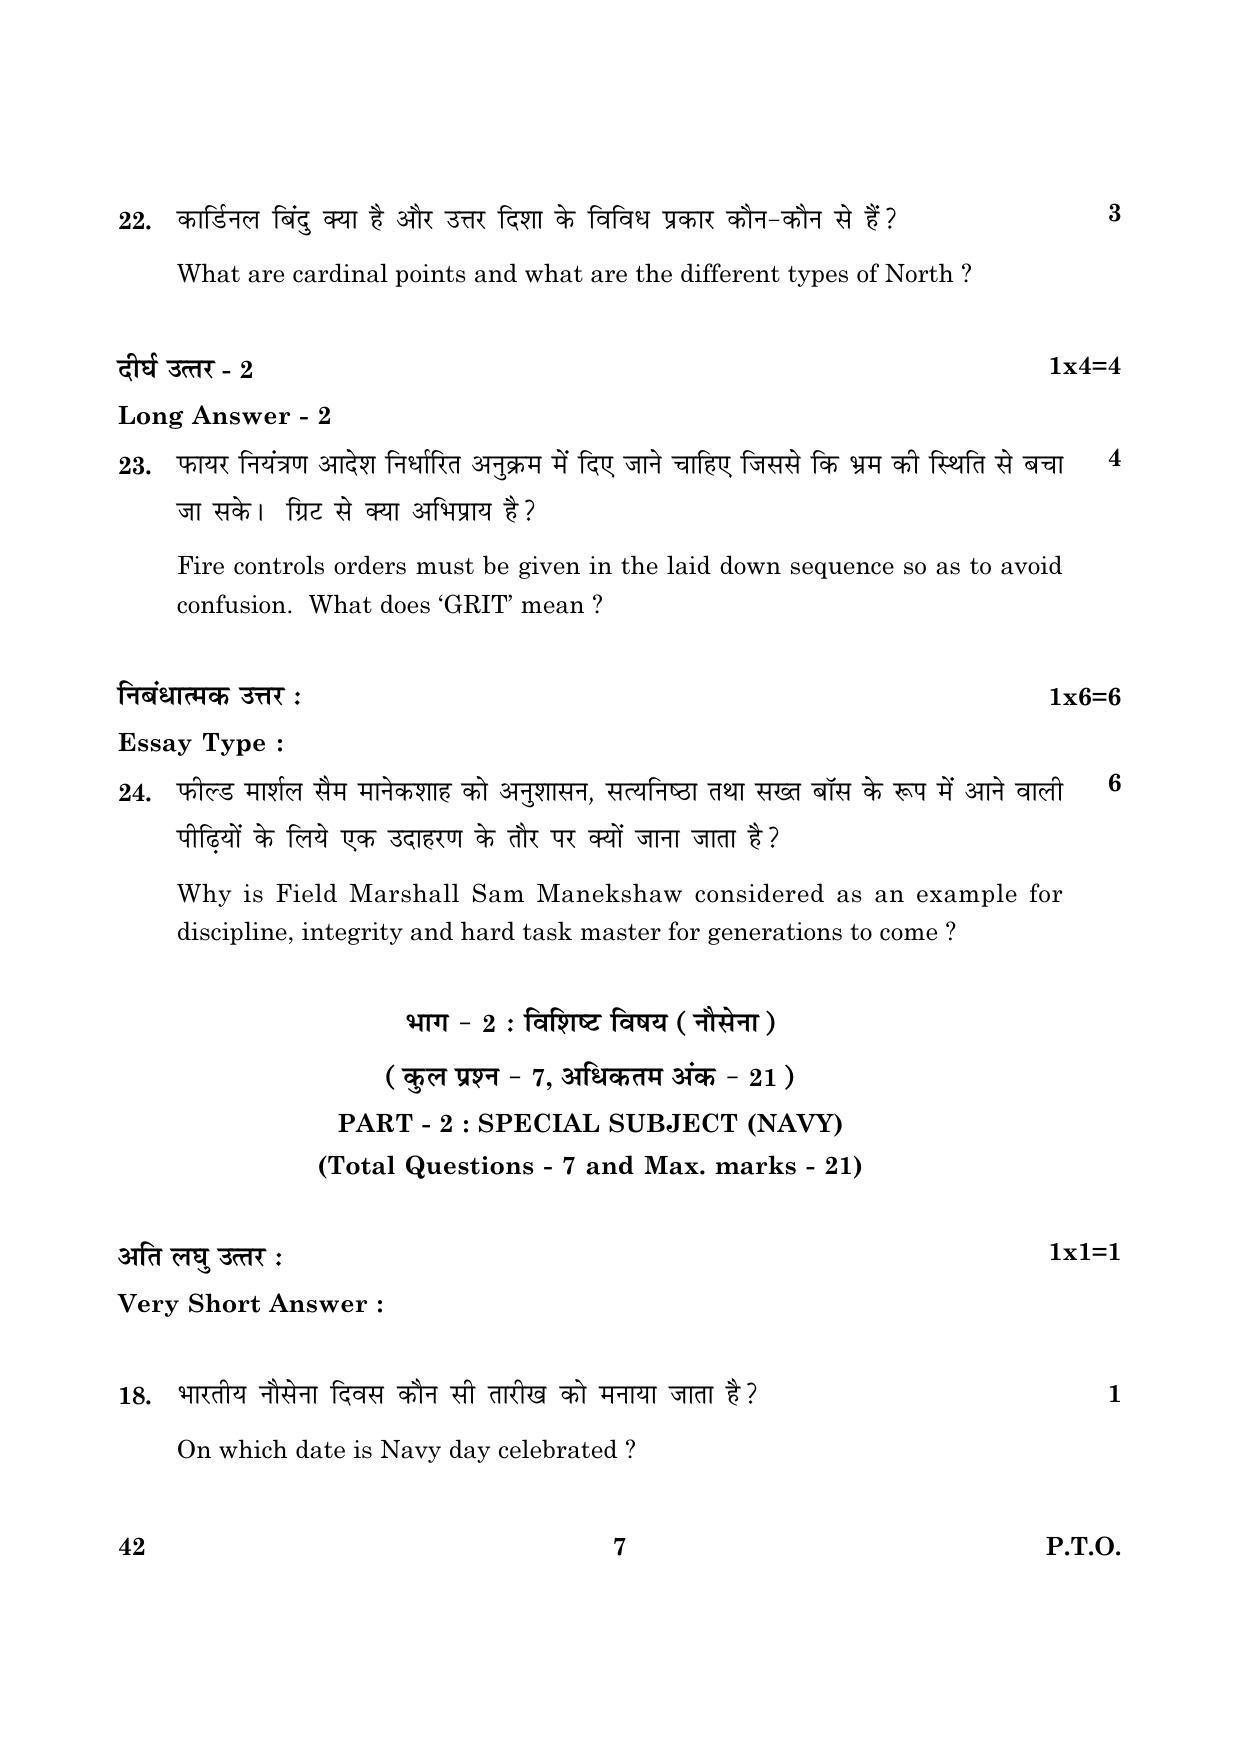 CBSE Class 12 042 National Cadet Corps (NCC) 2016 Question Paper - Page 7